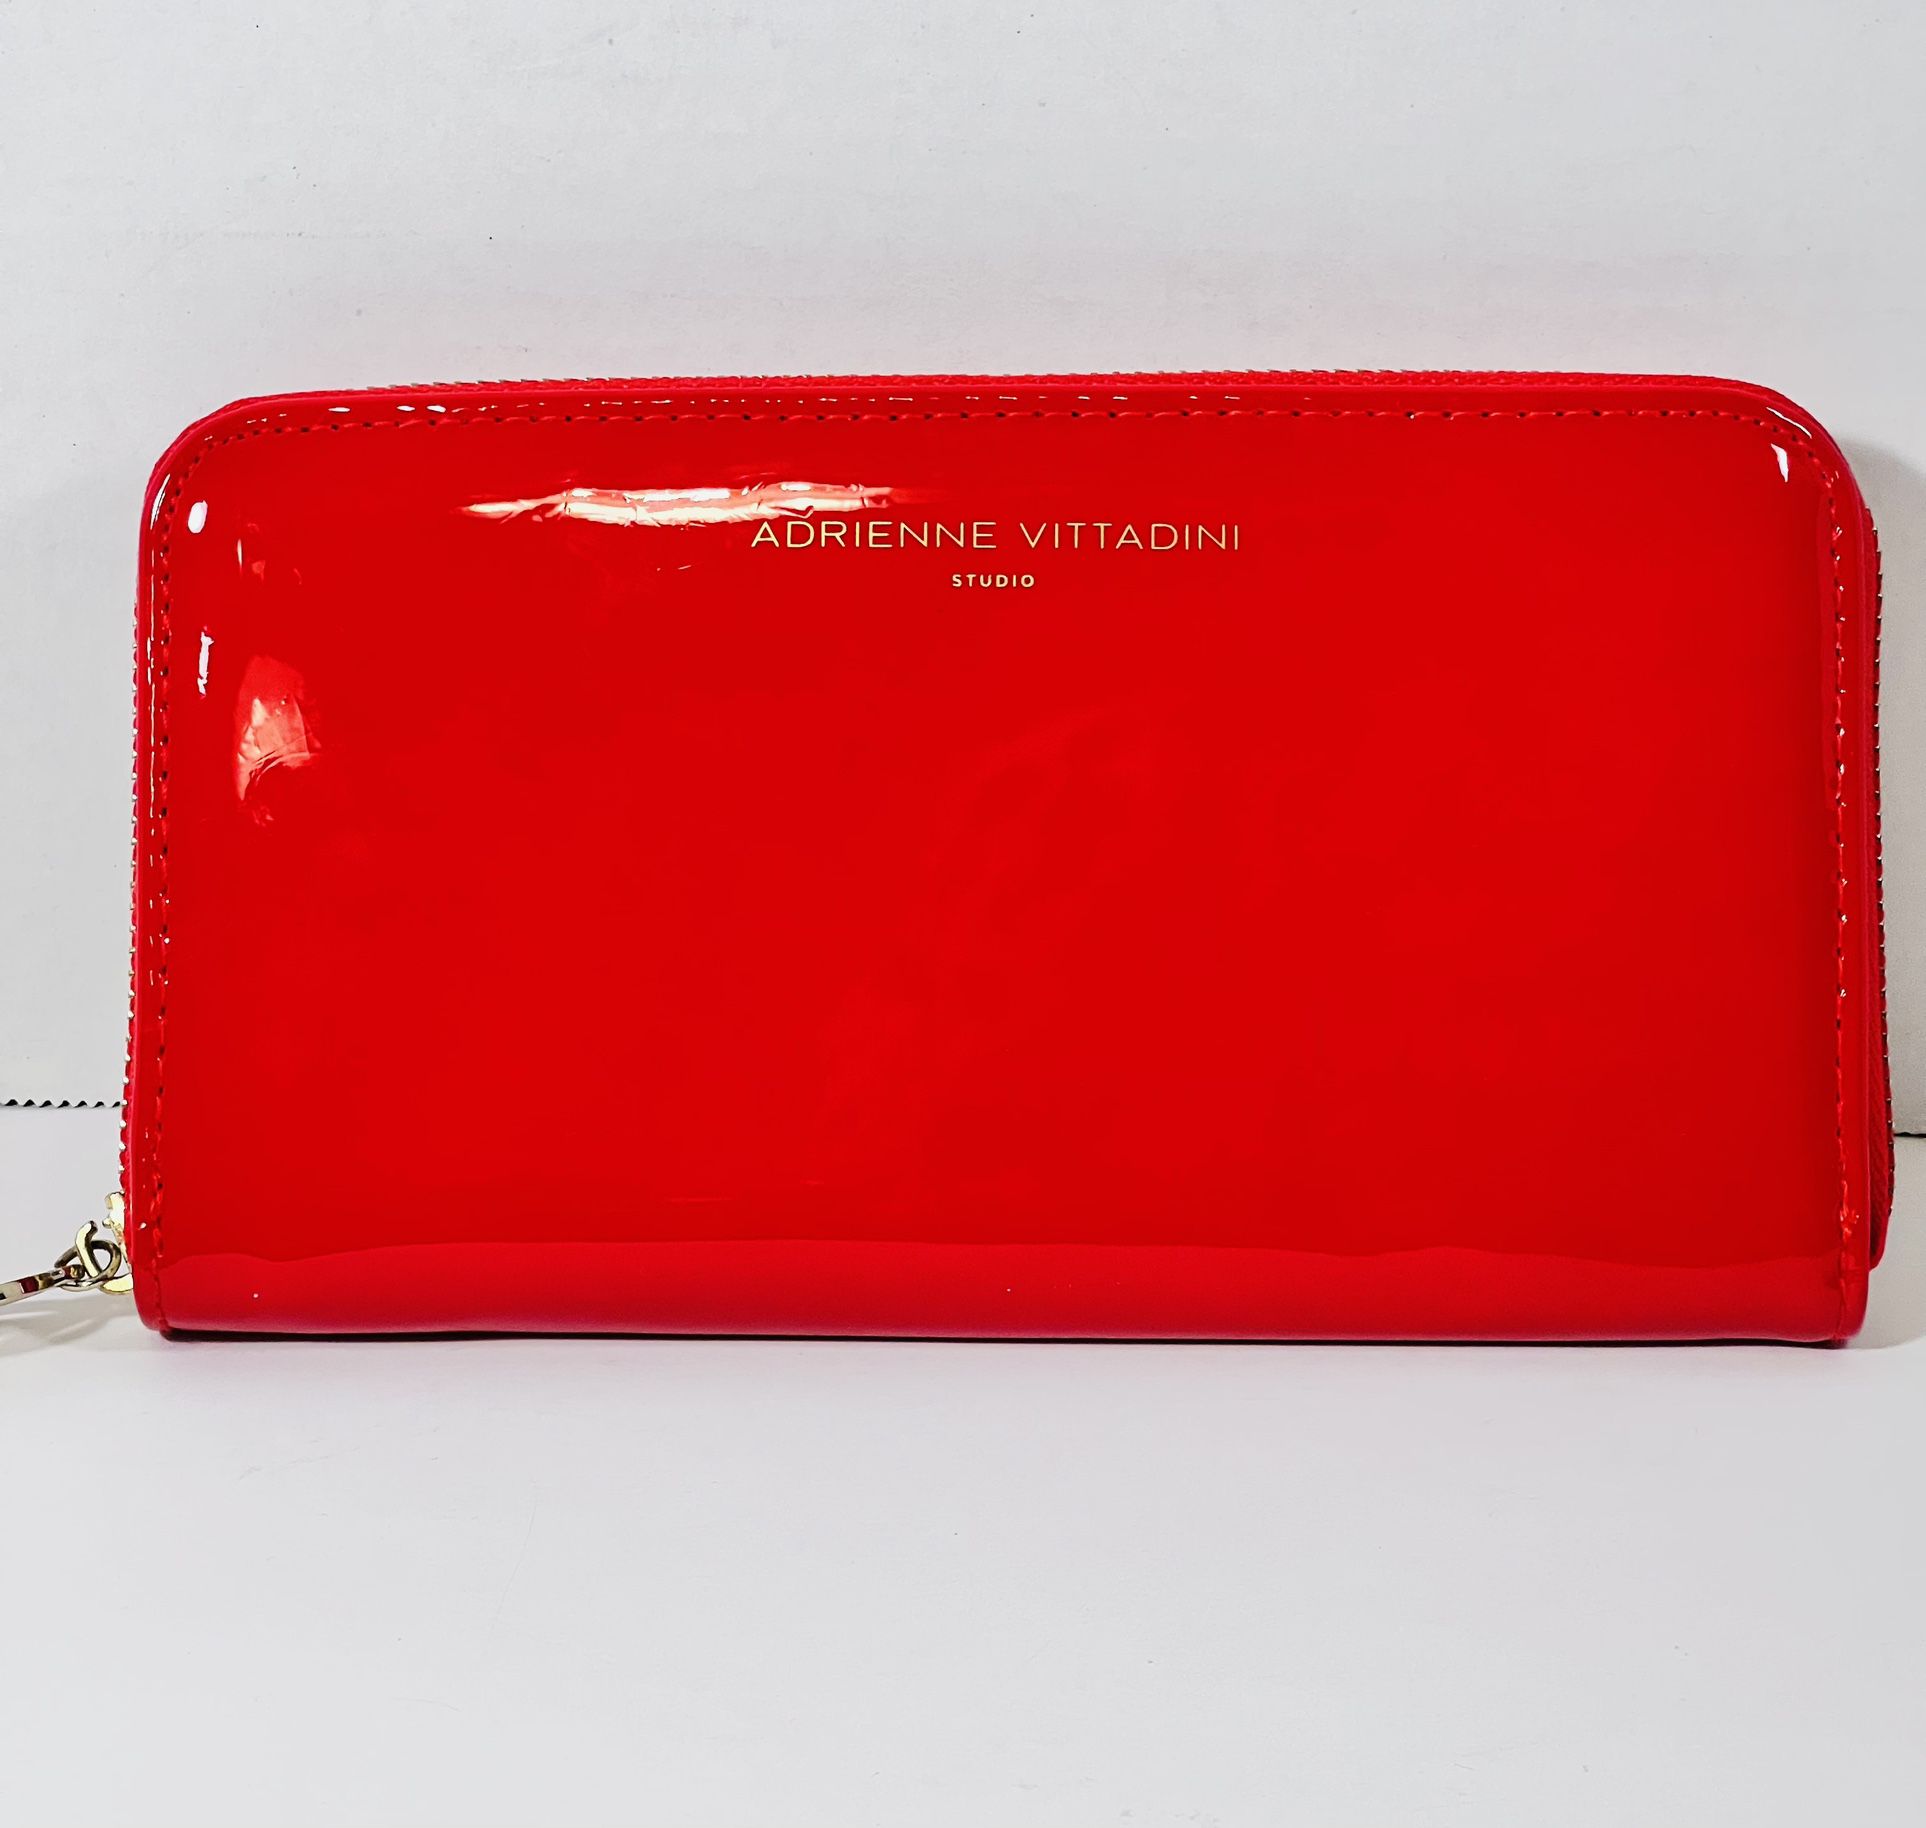 Adrianne Vittadini red glossy wallet